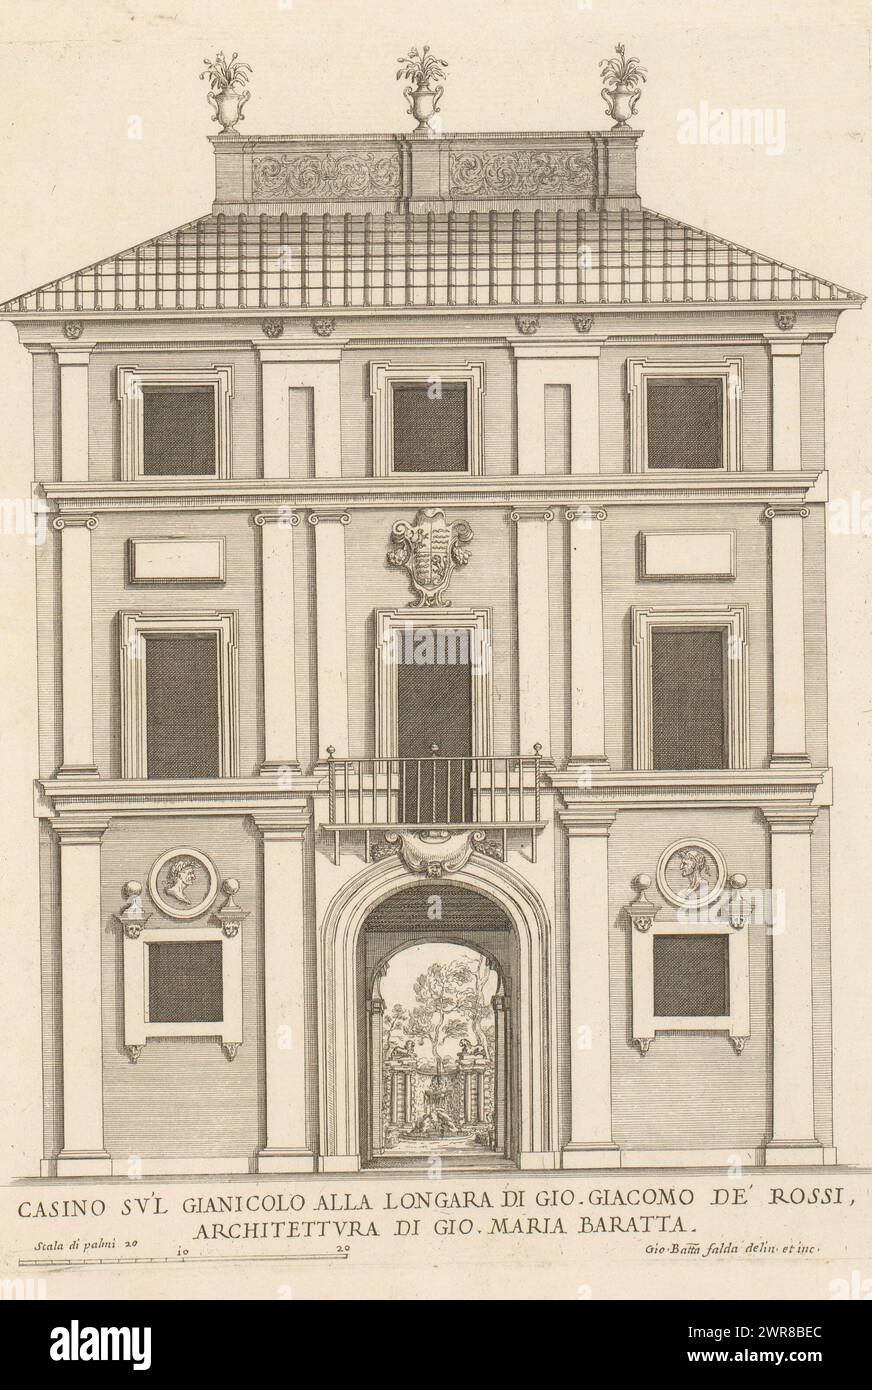 Façade of the casino at Gianicolo alla Lungara, Casino su'l Gianicolo alla Longara di Gio. Giacomo de' Ross (...) (title on object), Roman palaces (series title), Palazzi di Roma (series title), Palazzi di Roma dei più celebri architett (...) (series title), Print is part from an album., print maker: Giovanni Battista Falda, after drawing by: Giovanni Battista Falda, after design by: Giovanni Maria Baratta, print maker: Italy, after drawing by: Italy, after design by: Rome, publisher: Rome, Vatican City, Rome, Italy, in or after 1655, paper, etching, height 337 mm × width 244 mm Stock Photo